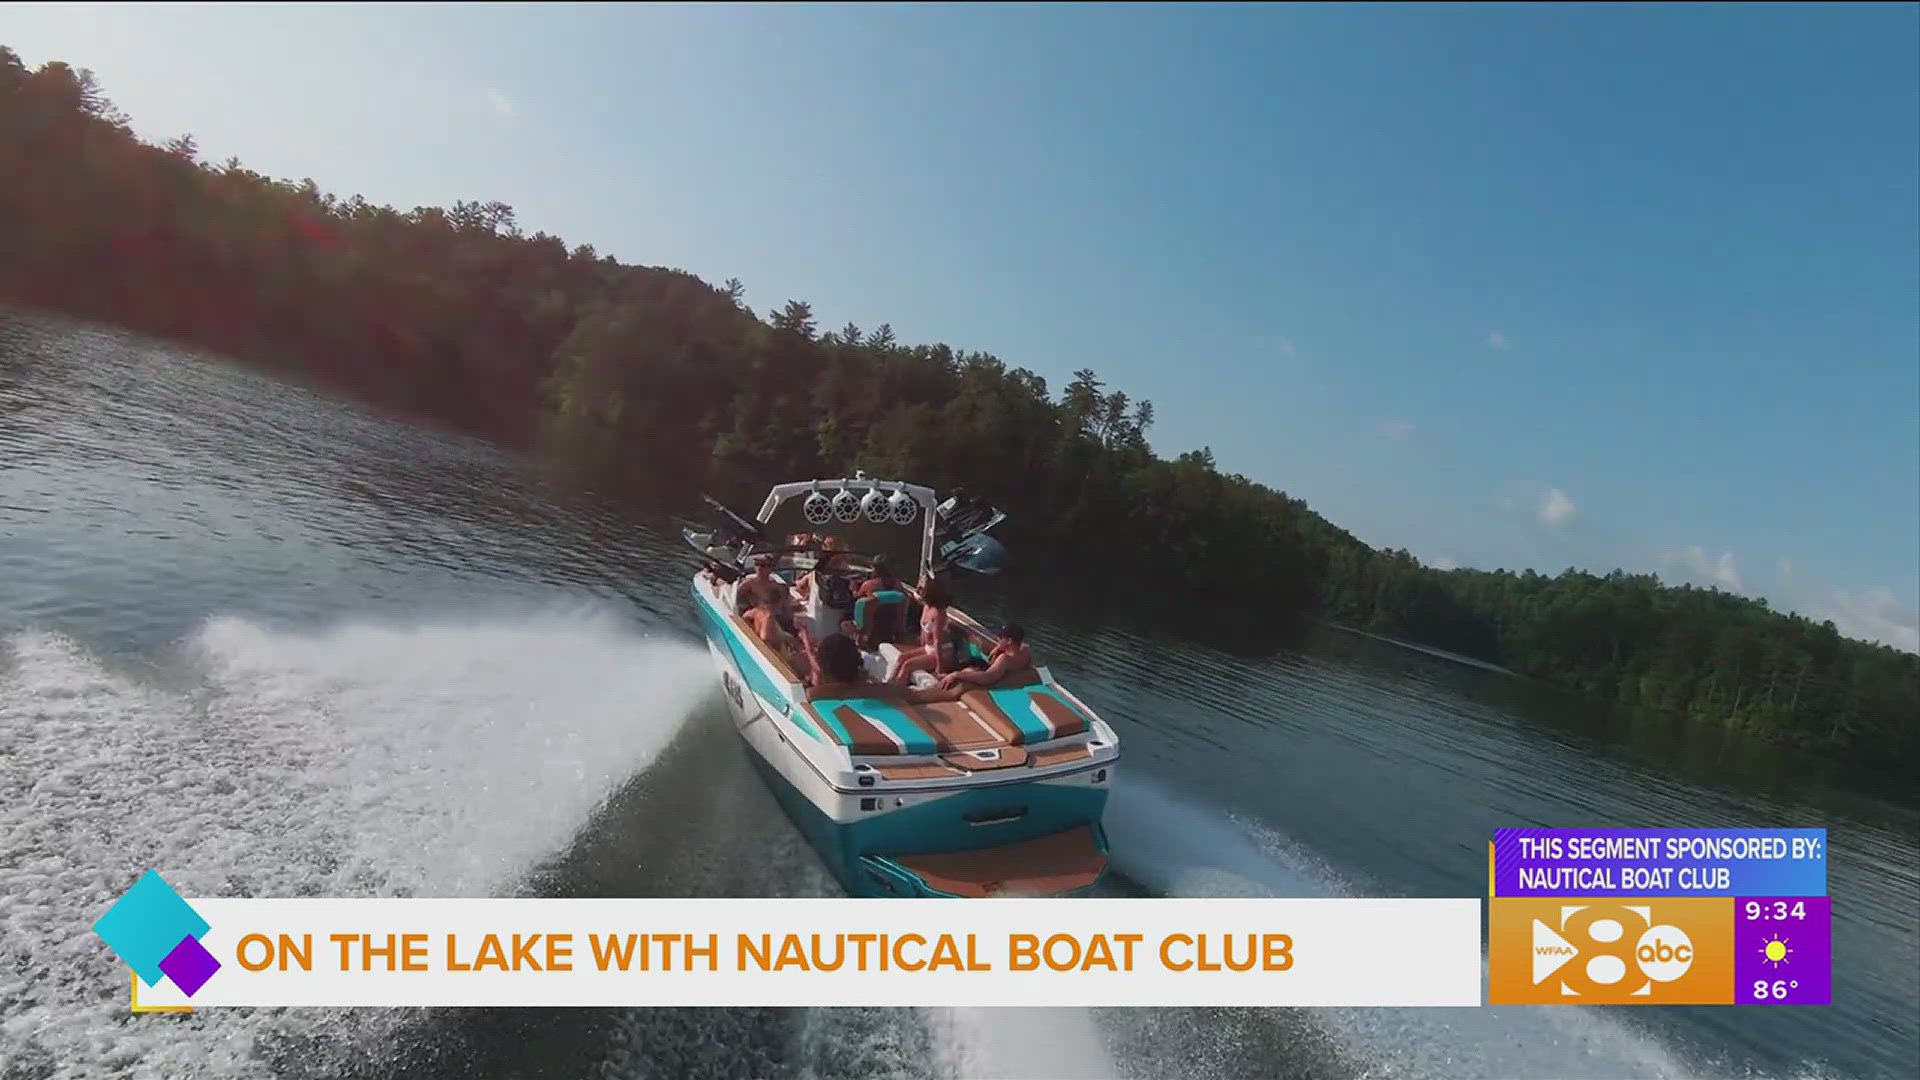 This segment is sponsored by Nautical Boat Club.